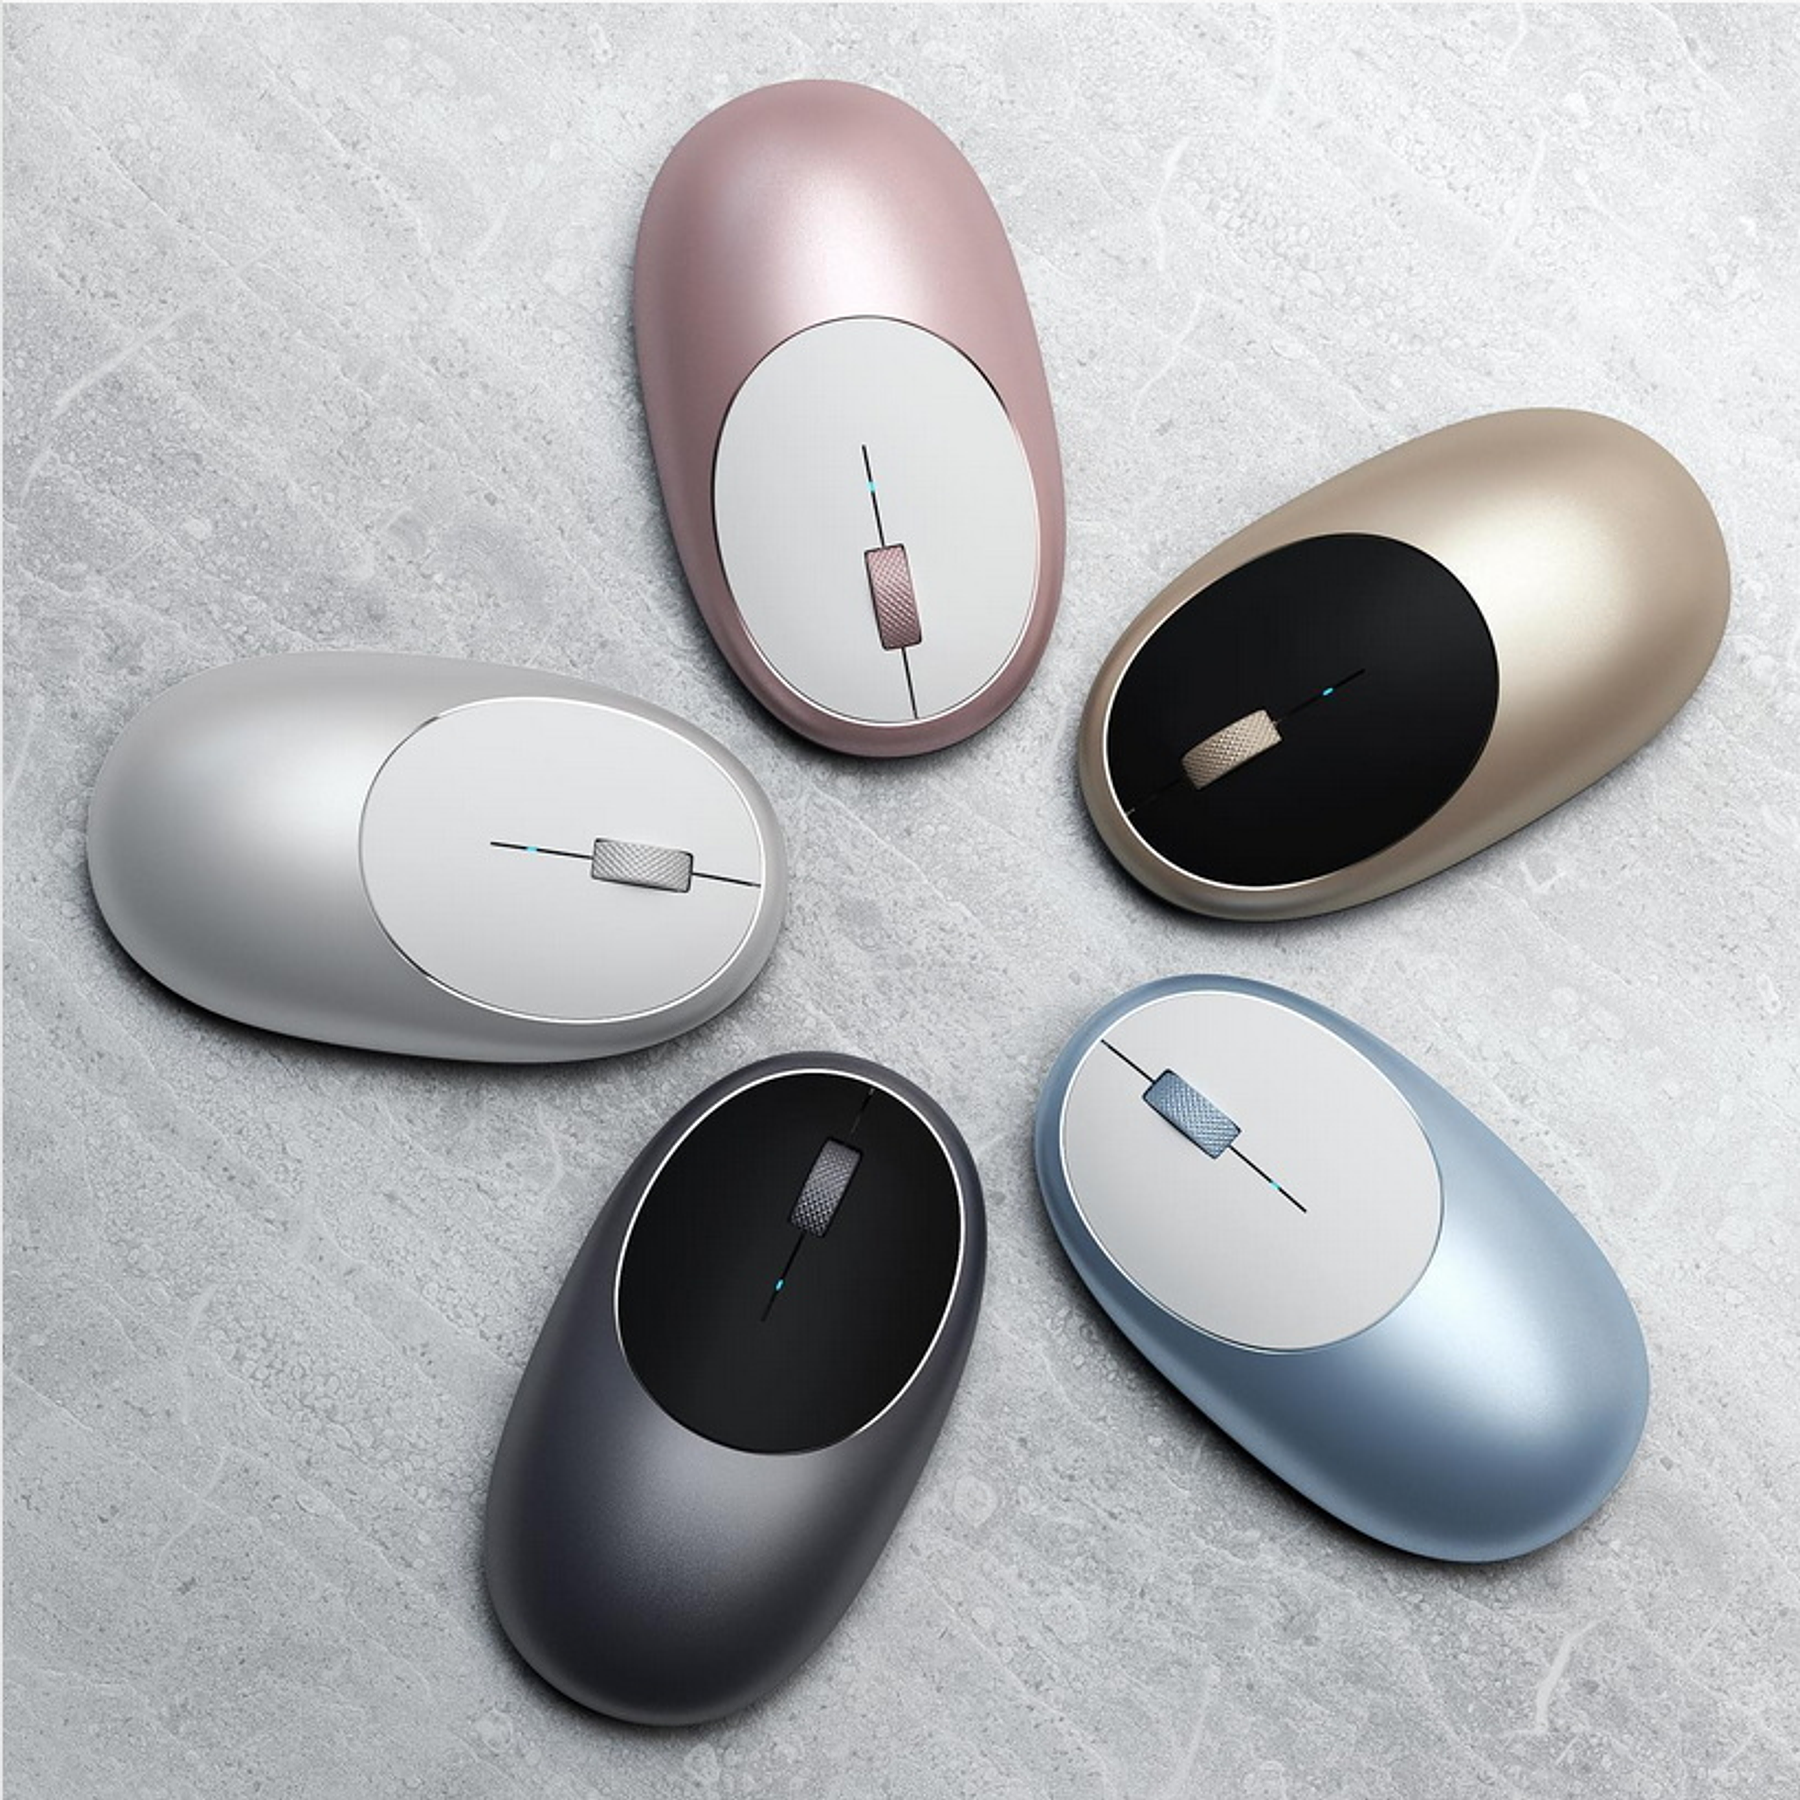 Satechi - M1 Wireless Mouse (gold)